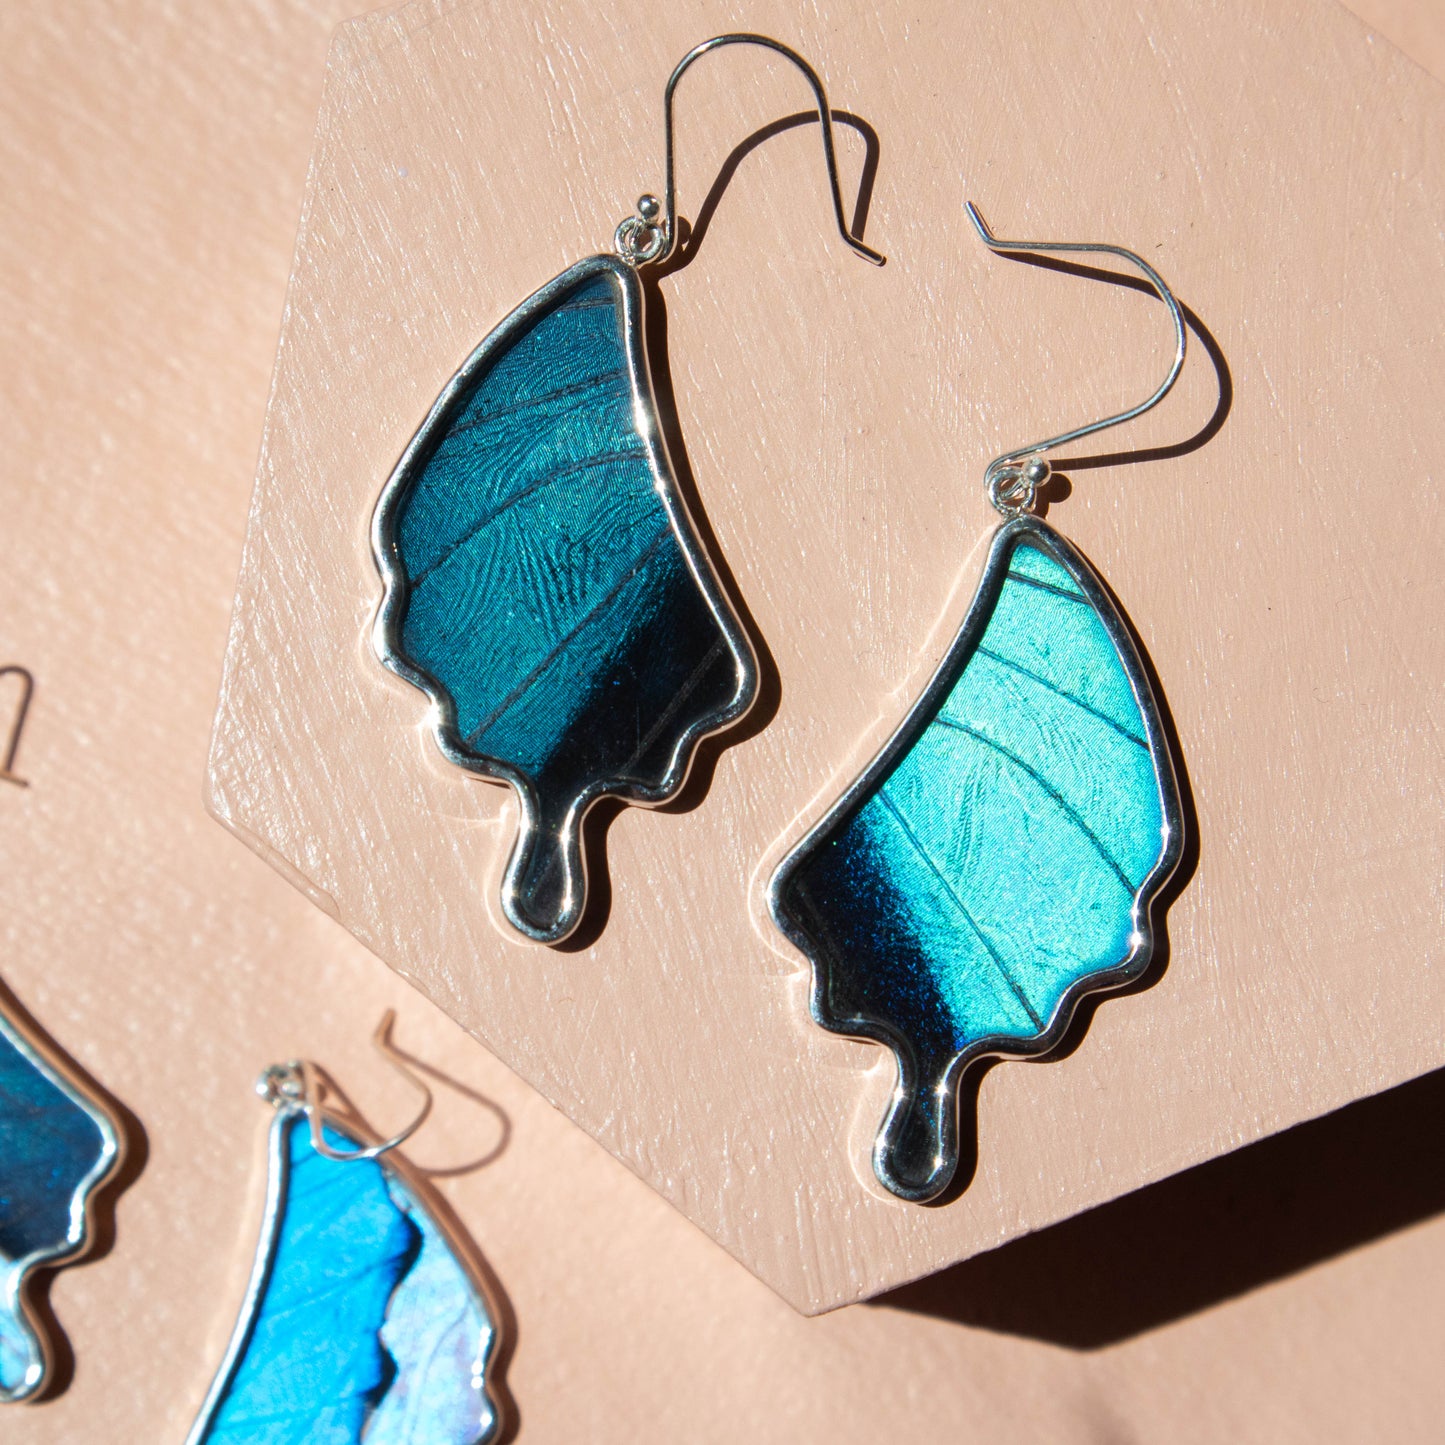 preserved butterfly earrings, preserved butterflies, butterflies, butterfly wings, morpho achilles, morpho achilles butterfly, morpho achilles species, butterfly jewelry, butterfly earrings, morpho sulkowski, morpho sulkowski species